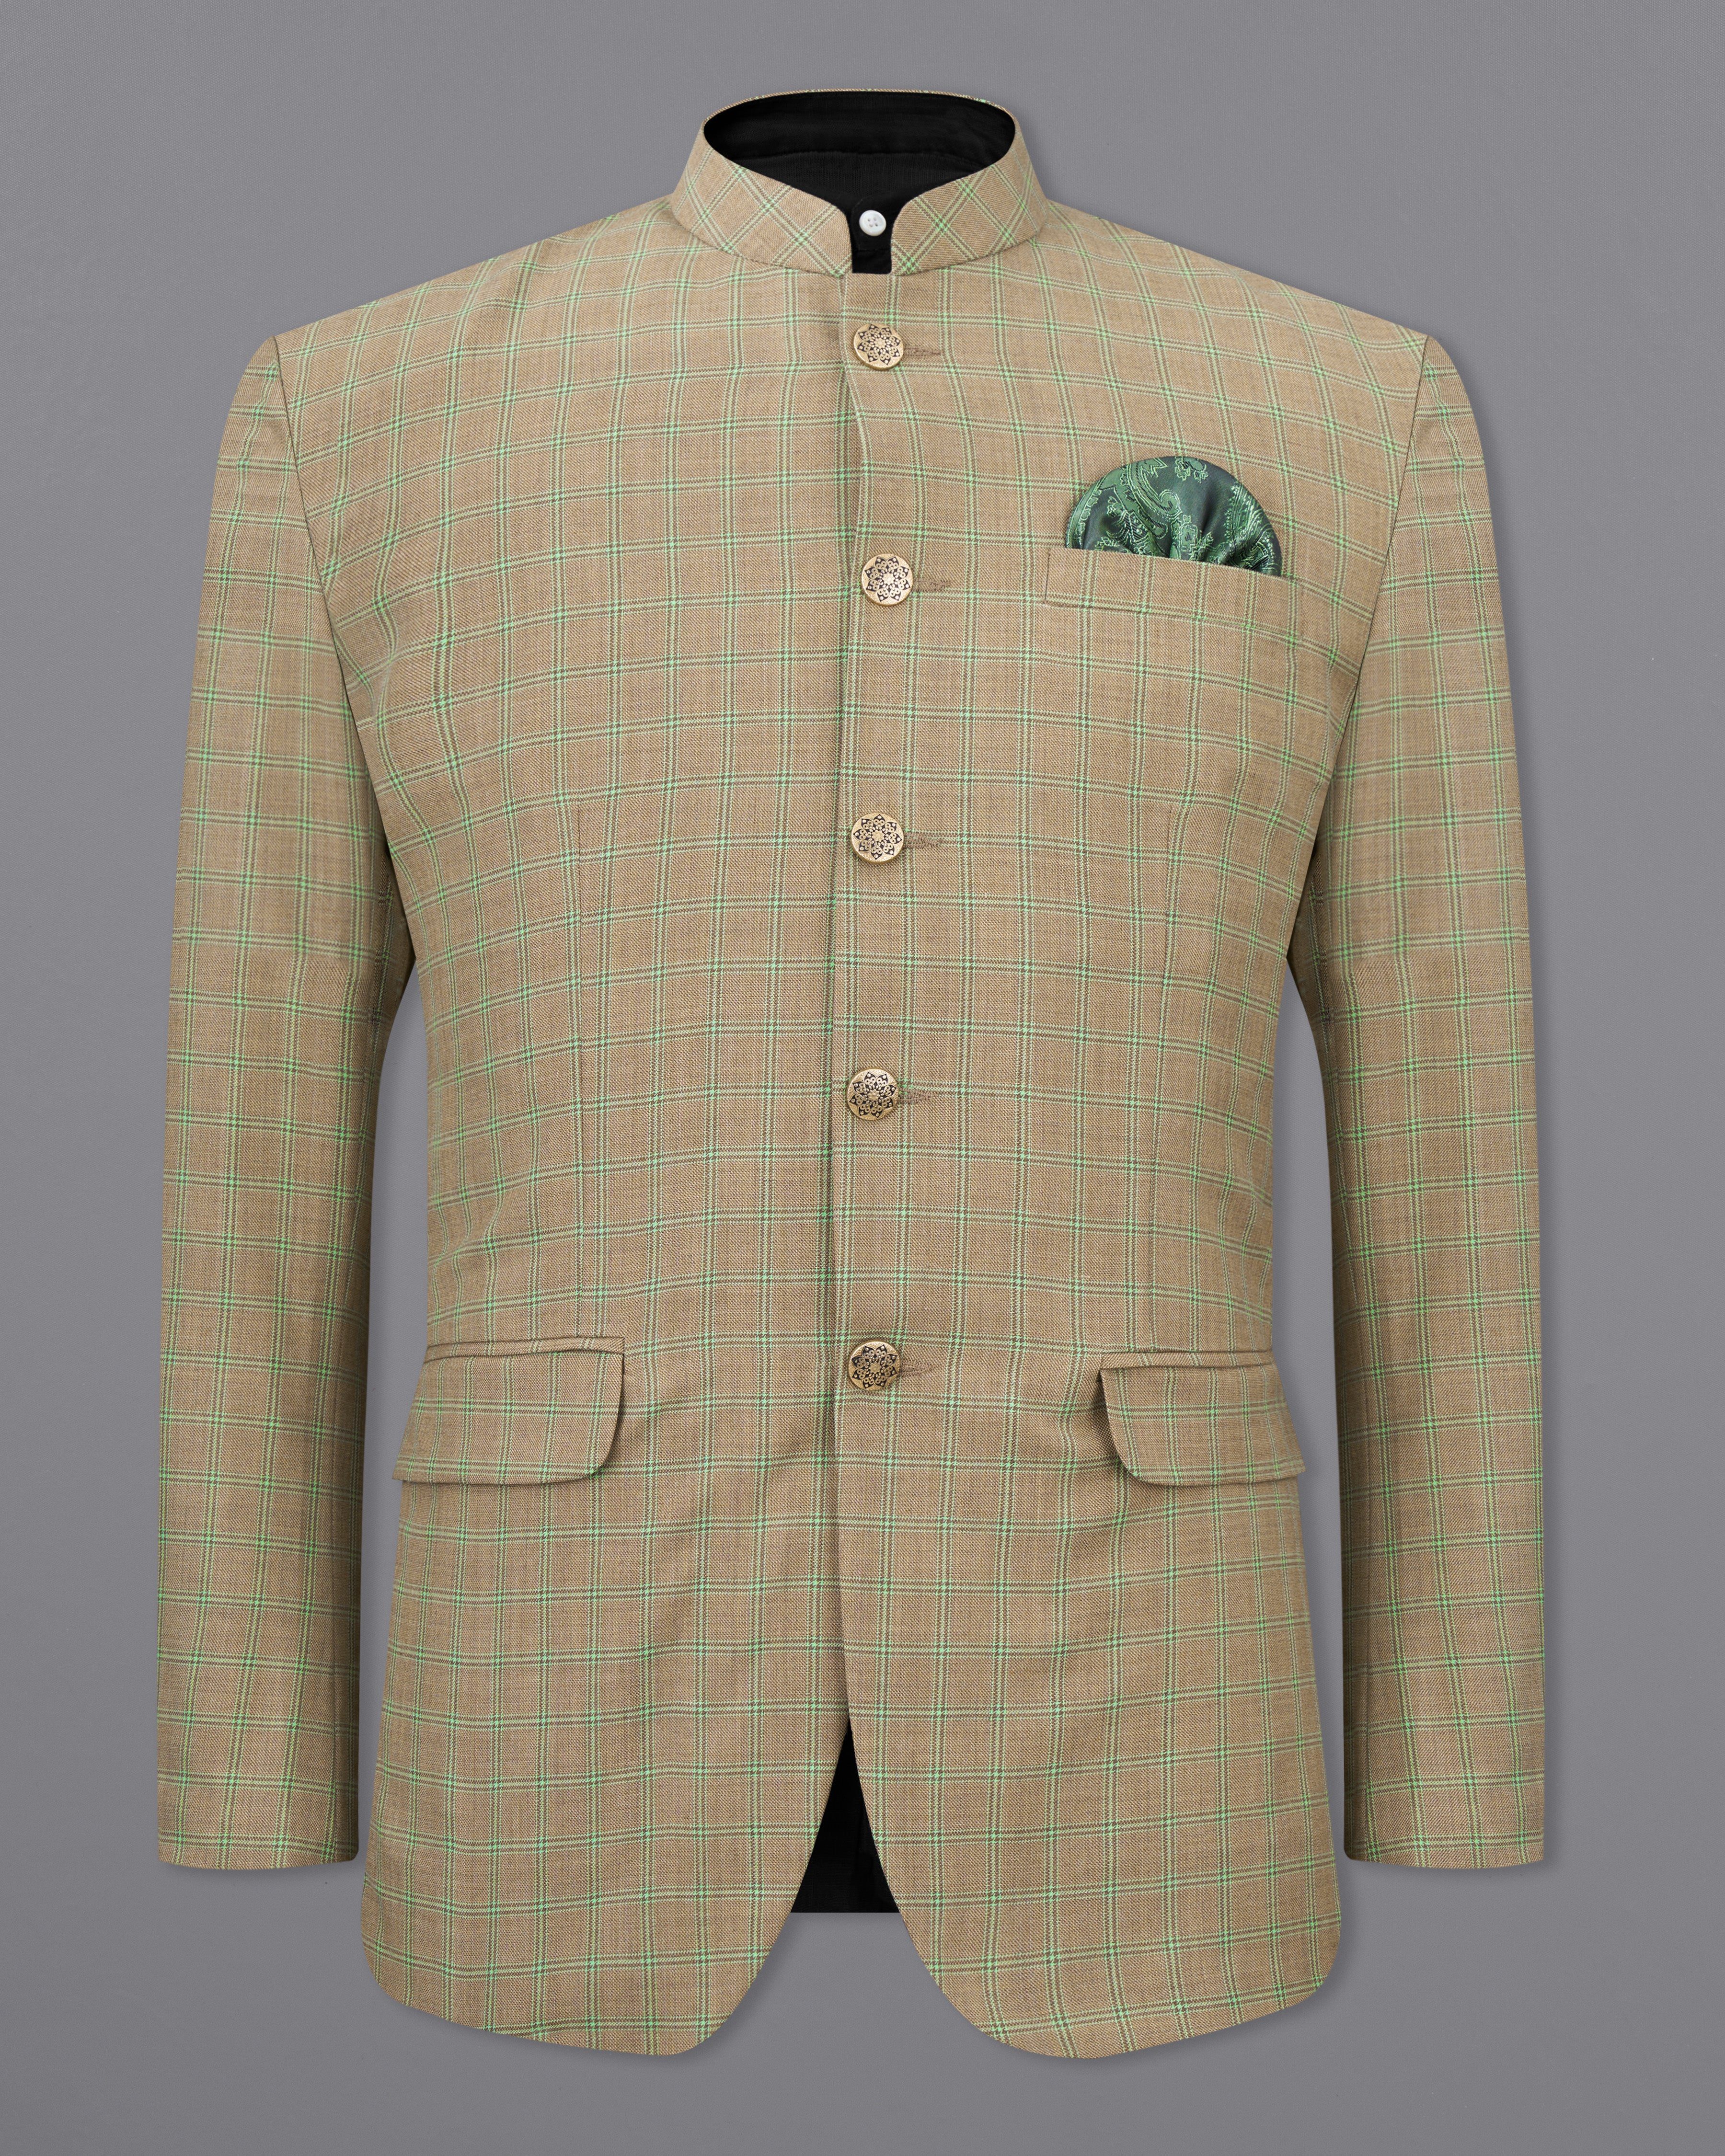 Sandrift Brown with Sprout Green Plaid Bandhgala Blazer BL2483-BG-36, BL2483-BG-38, BL2483-BG-40, BL2483-BG-42, BL2483-BG-44, BL2483-BG-46, BL2483-BG-48, BL2483-BG-50, BL2483-BG-52, BL2483-BG-54, BL2483-BG-56, BL2483-BG-58, BL2483-BG-60